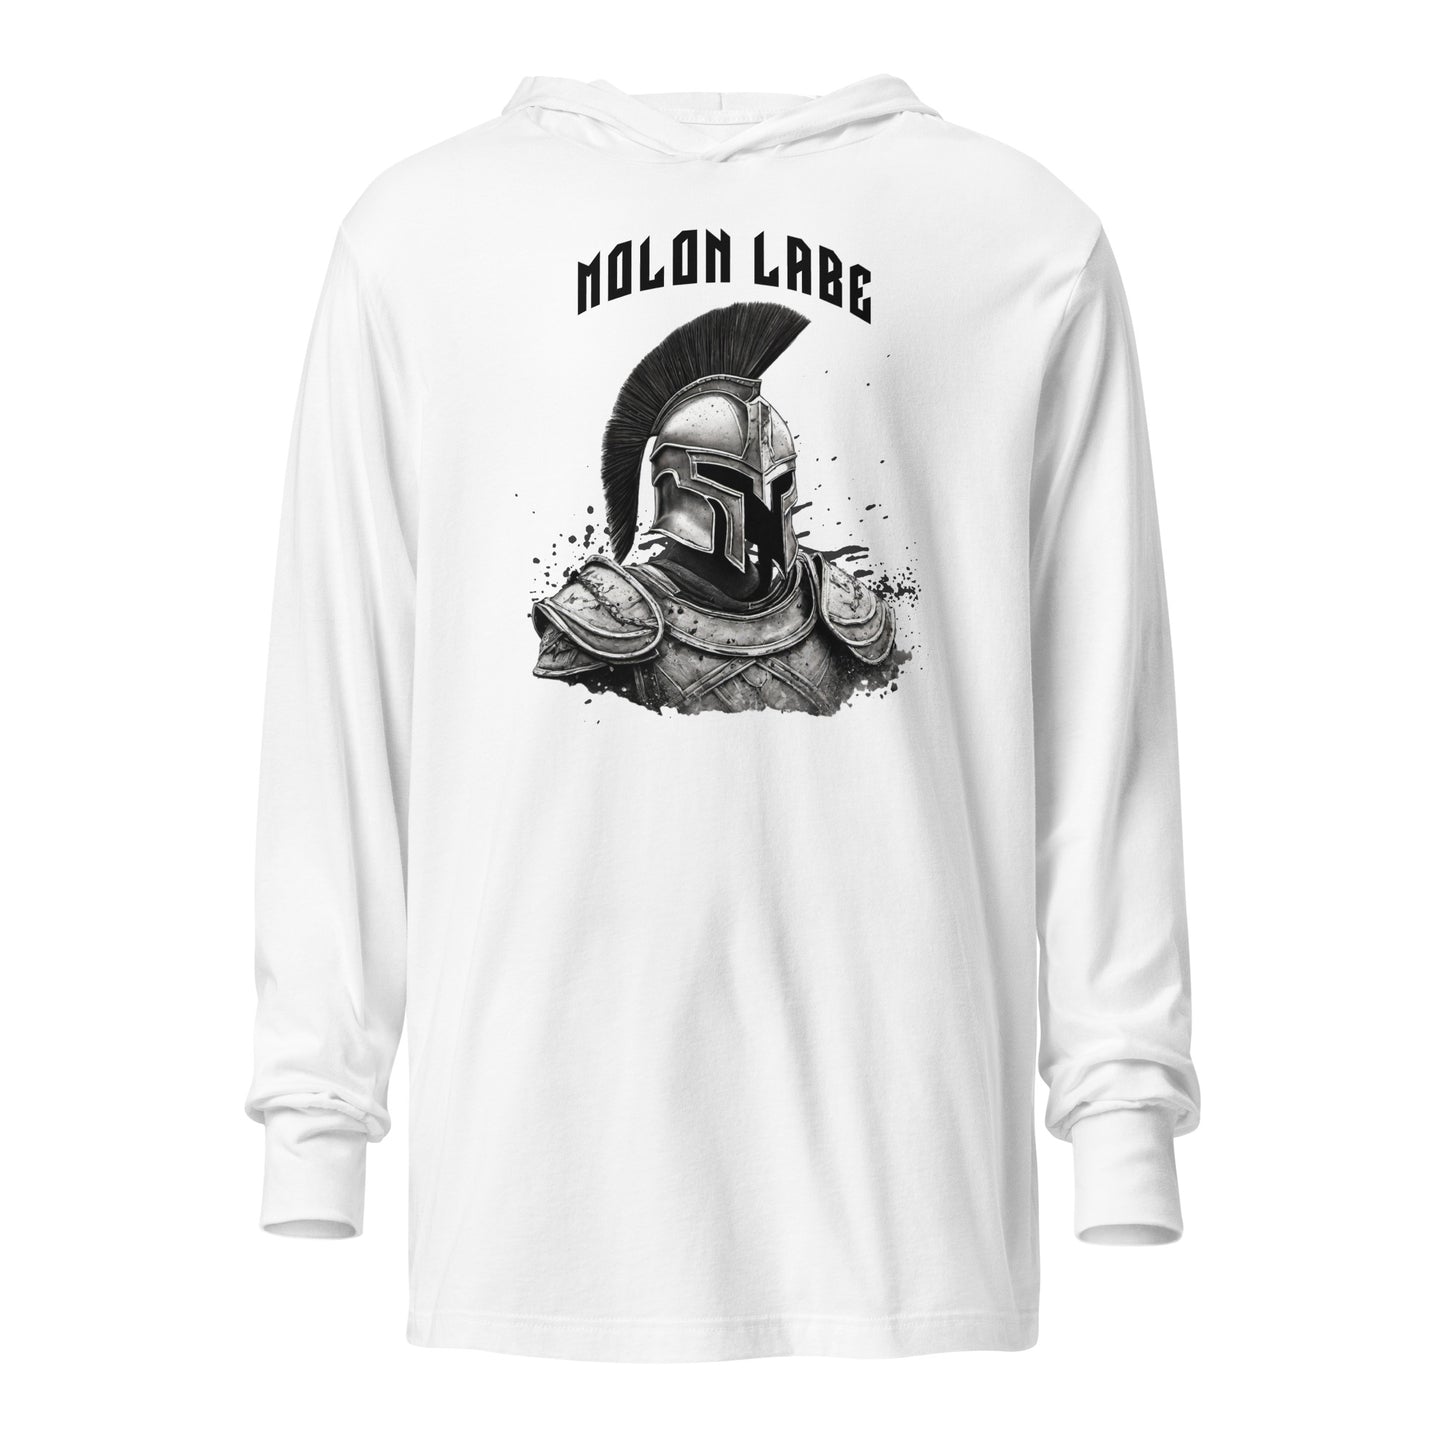 Molon Labe Spartan Graphic Hooded Long-Sleeve Tee White